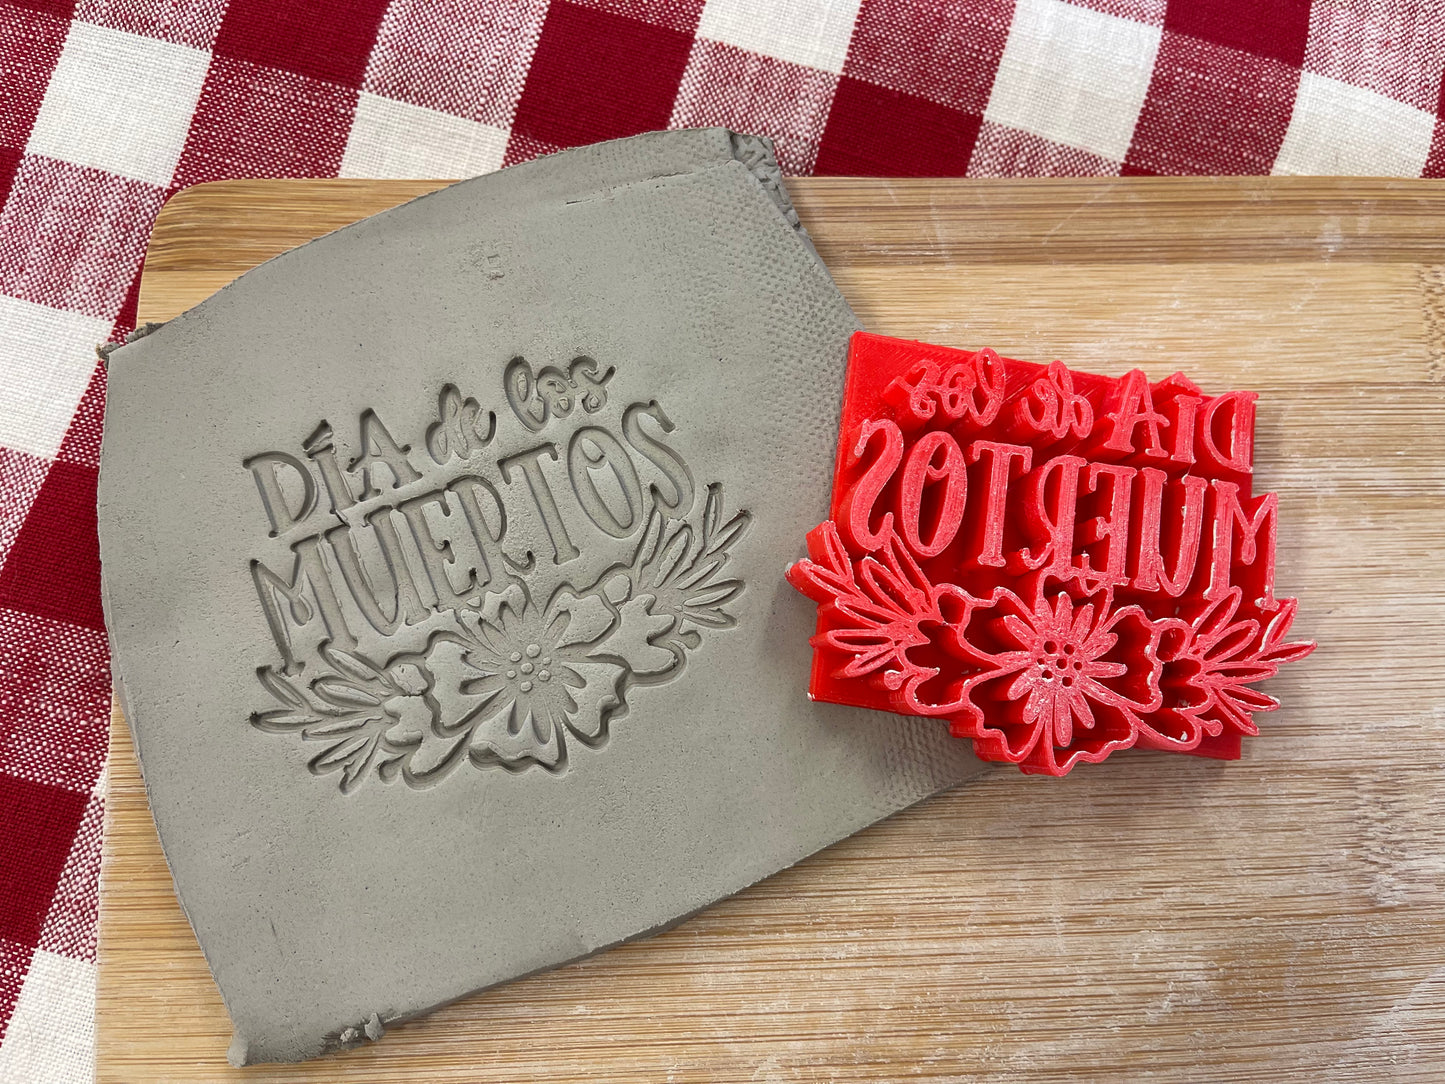 Dia de los Muertos - Day of the Dead design Pottery Stamp - words, 3D Printed Multiple Sizes Available